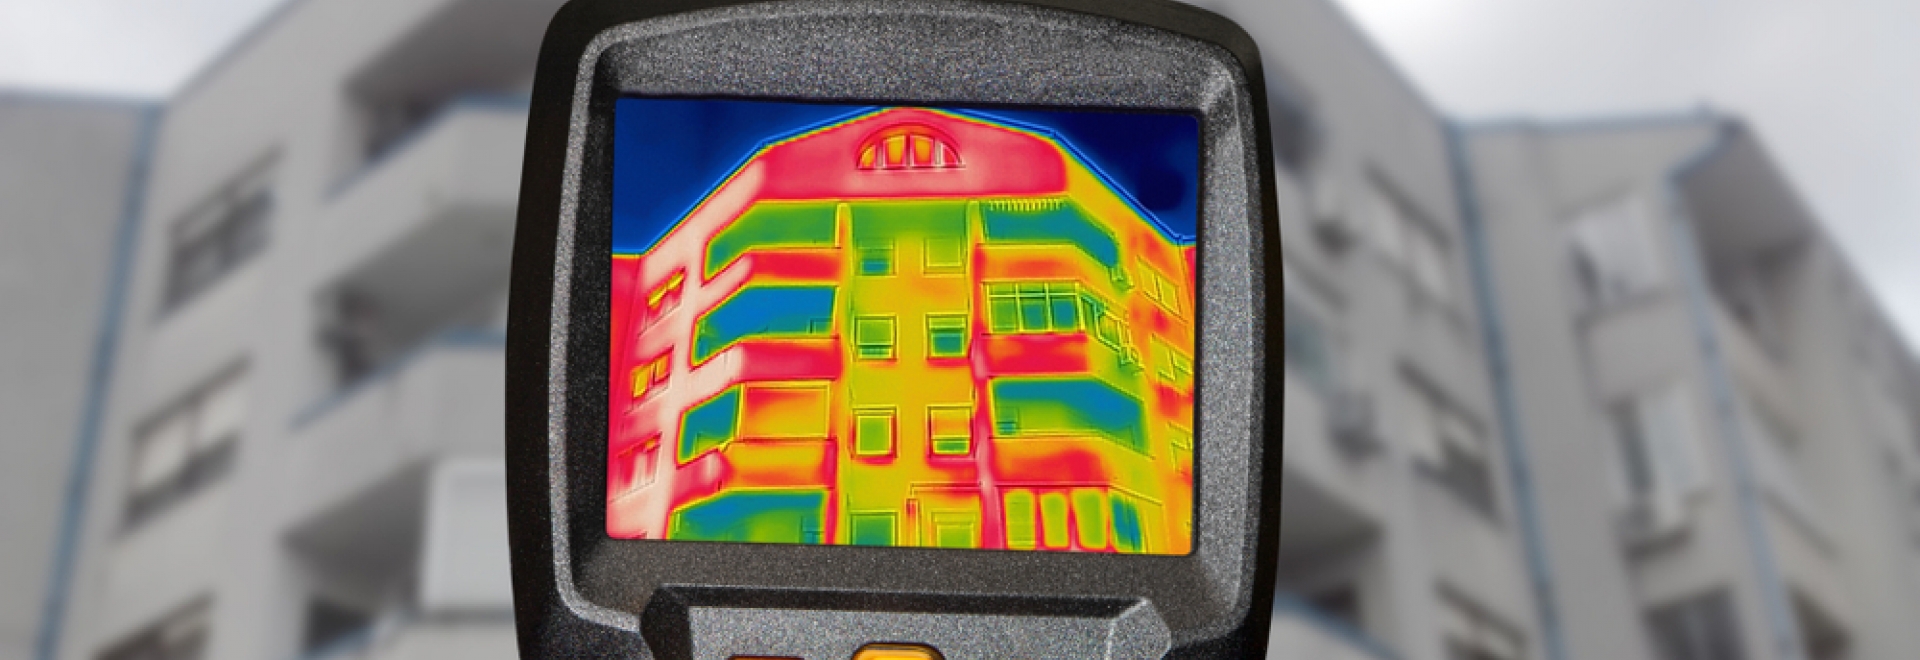 infrared thermal imaging on corporate building energy assessment